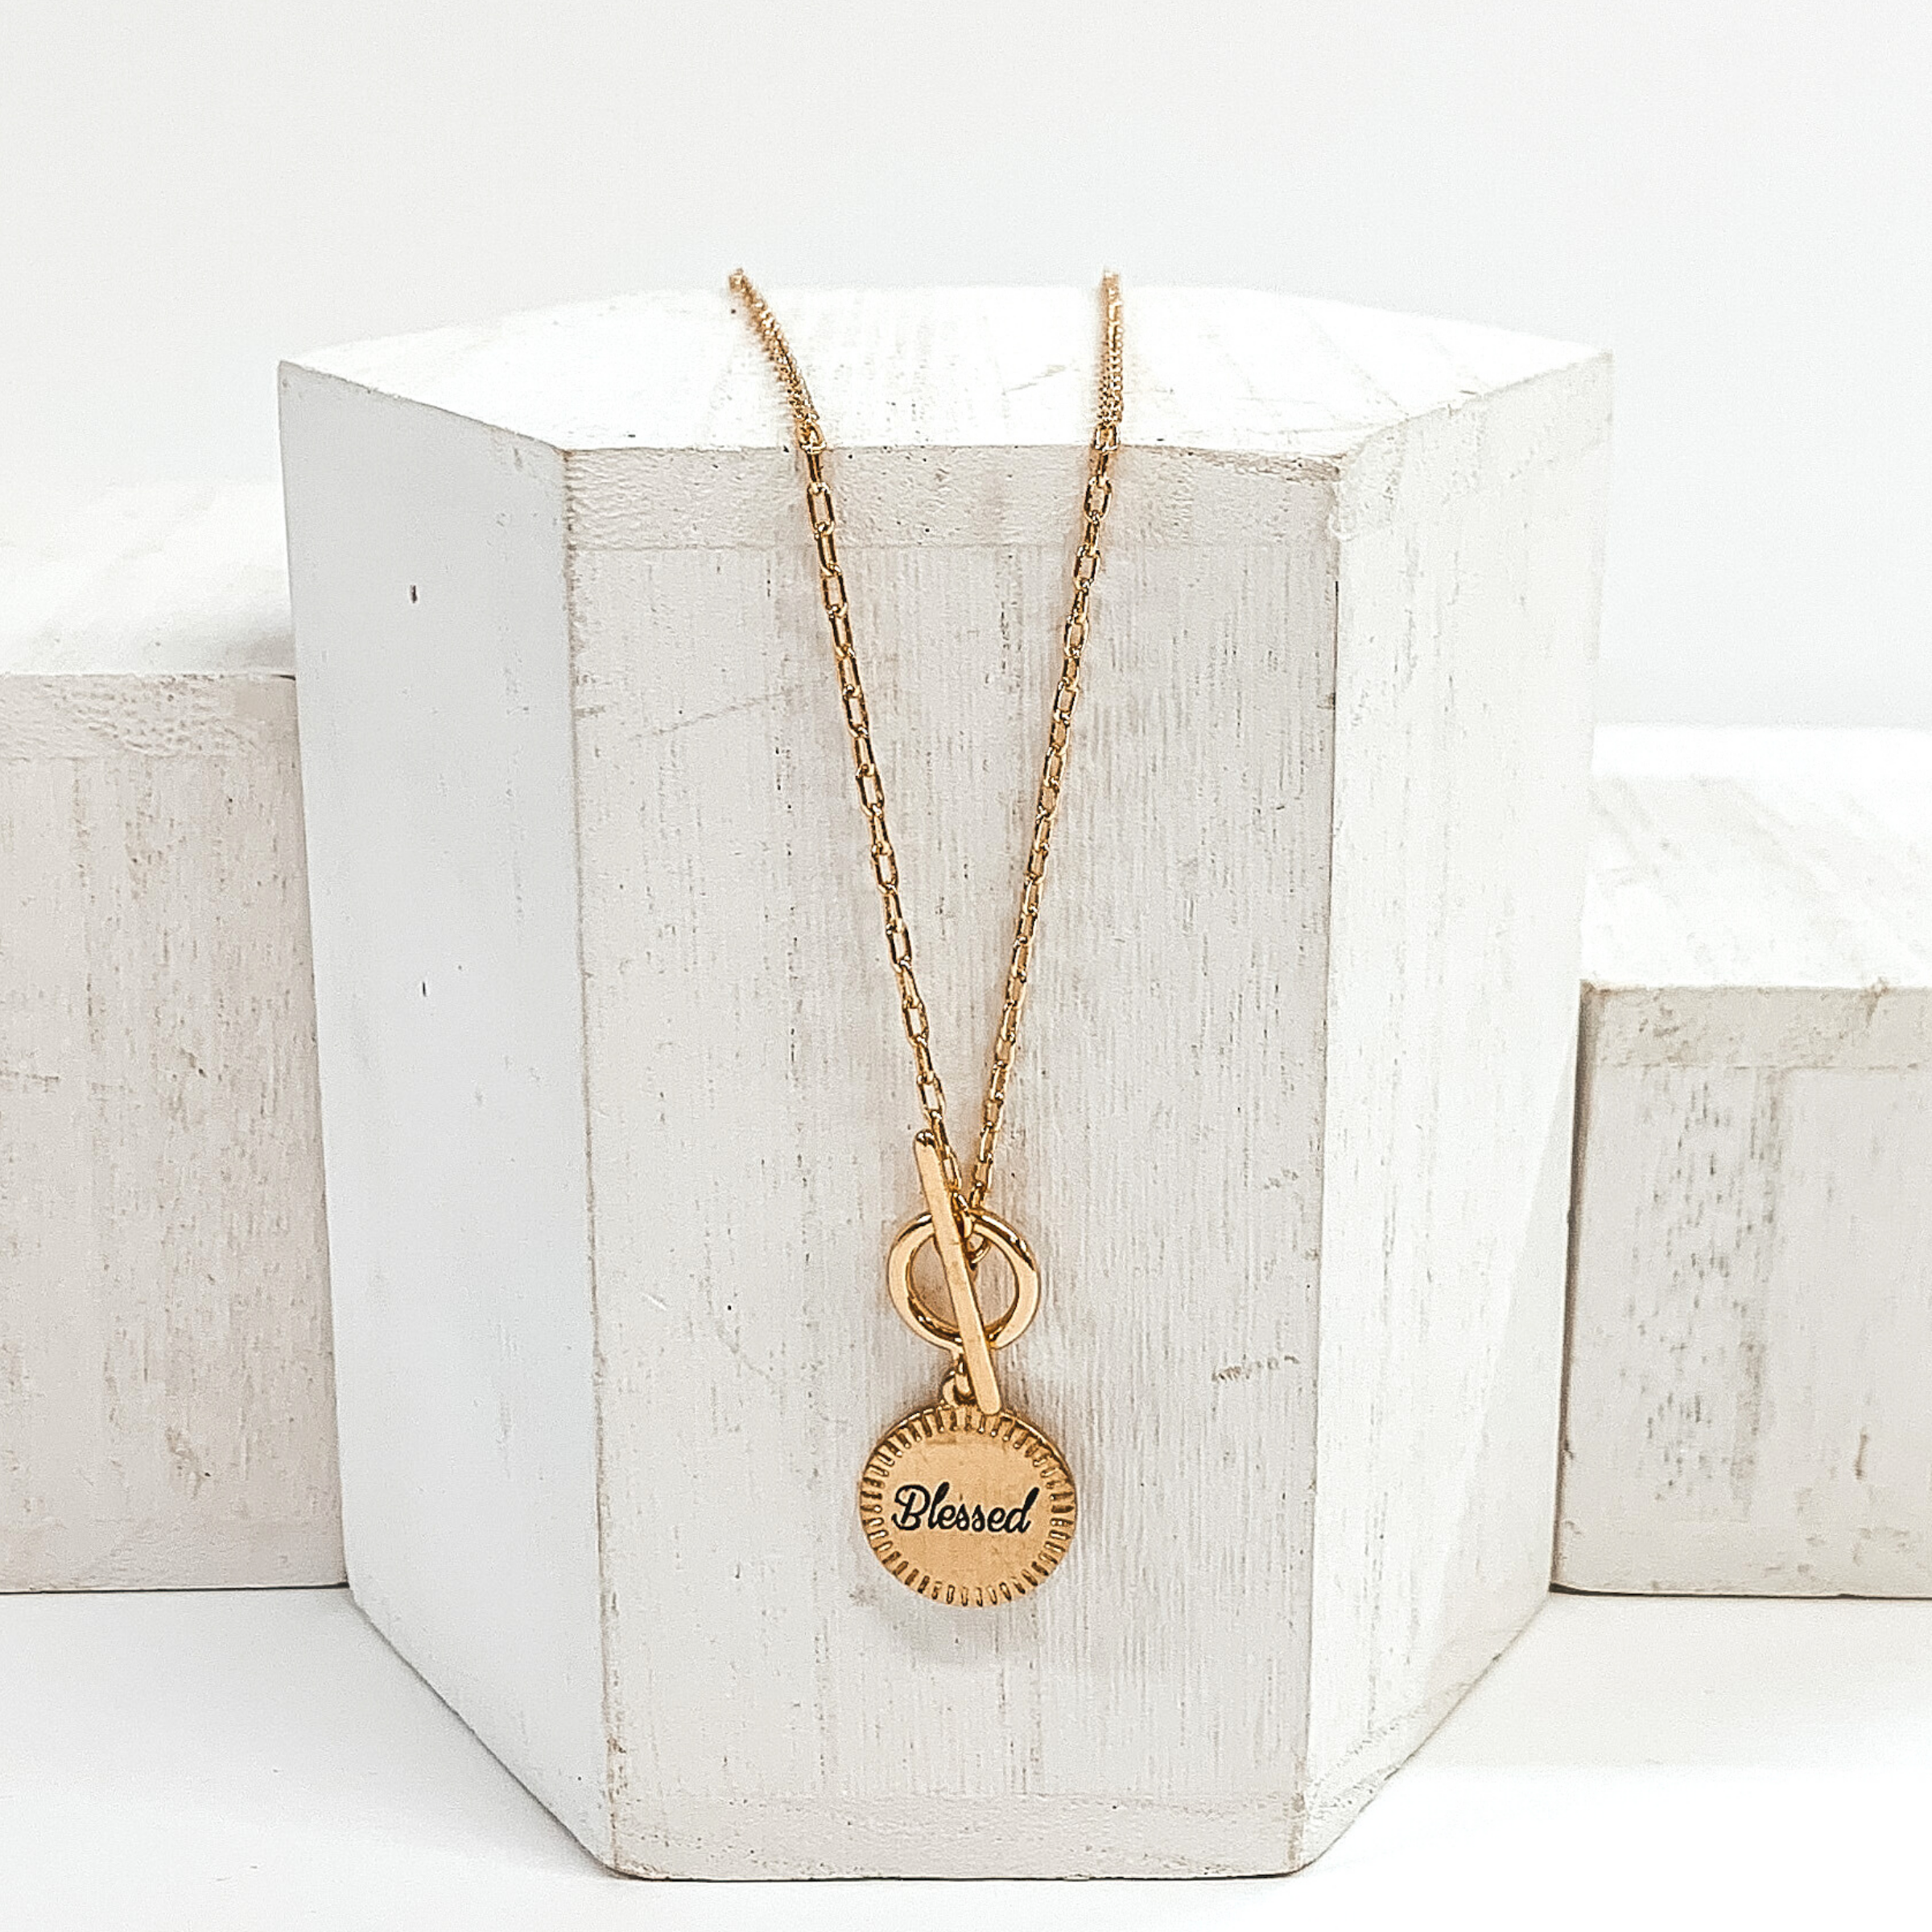 This is a gold necklace that has a front toggle clasp and a circle pendant with the word "blessed" written in the center. This neecklace is pictured laying on a white block and on a white background.